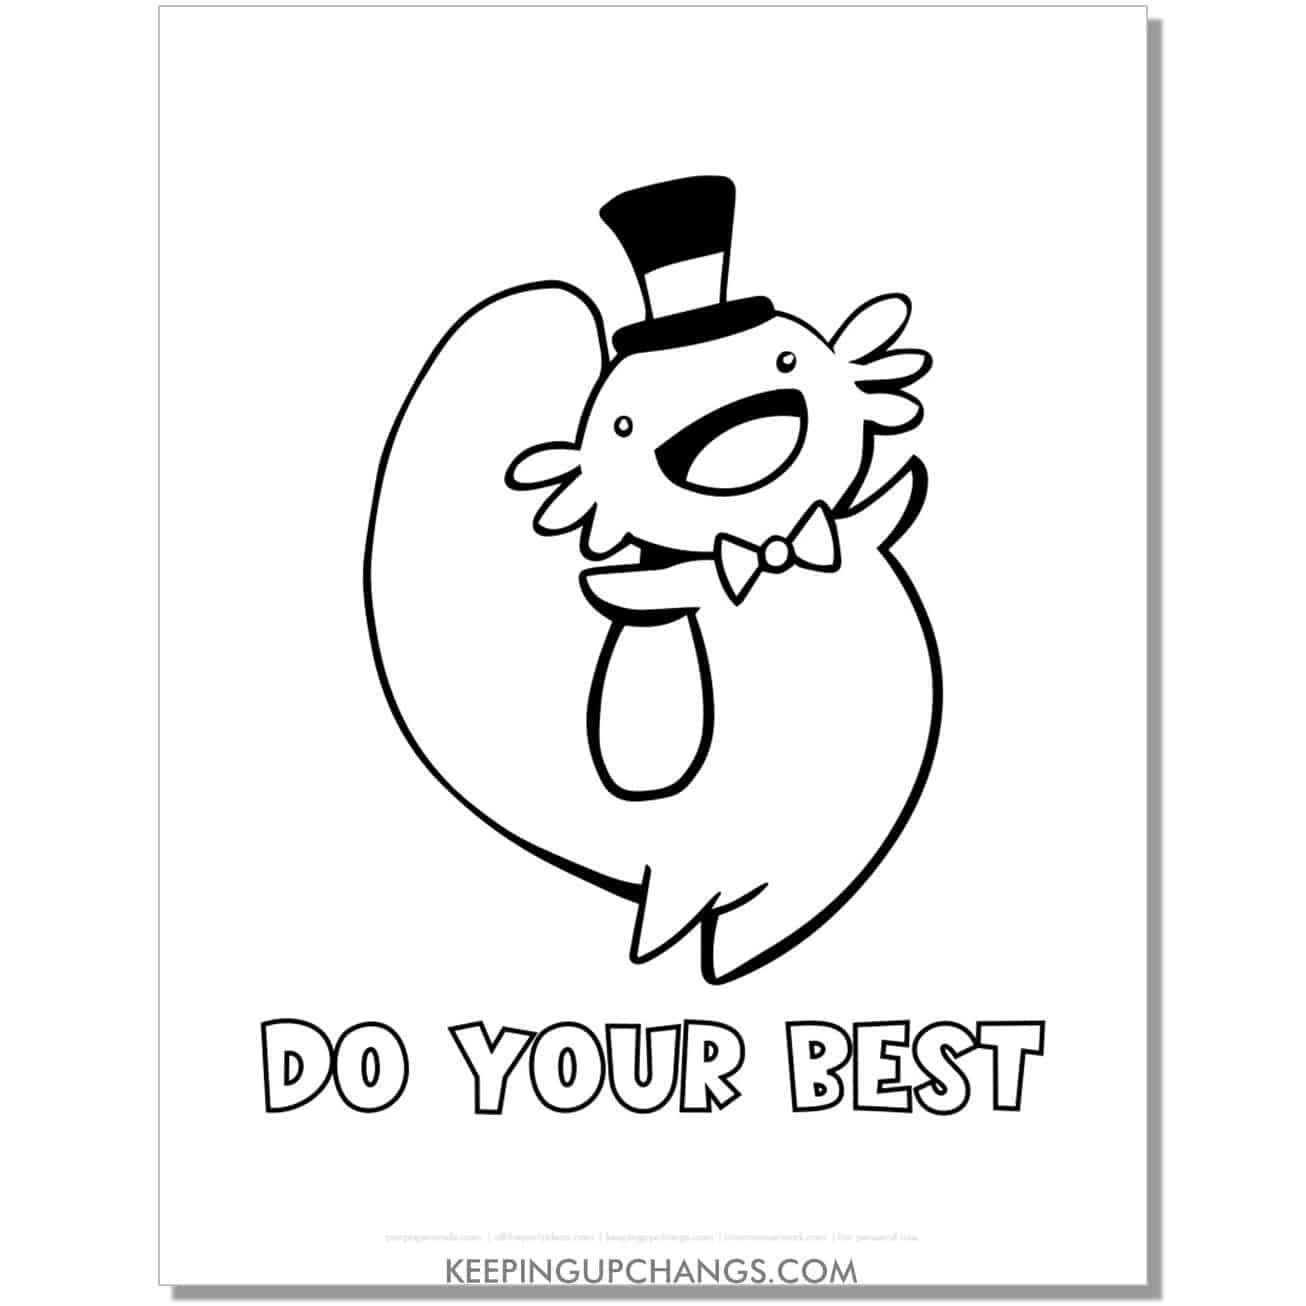 free cute, fun axolotl in top hat coloring page with do your best message.